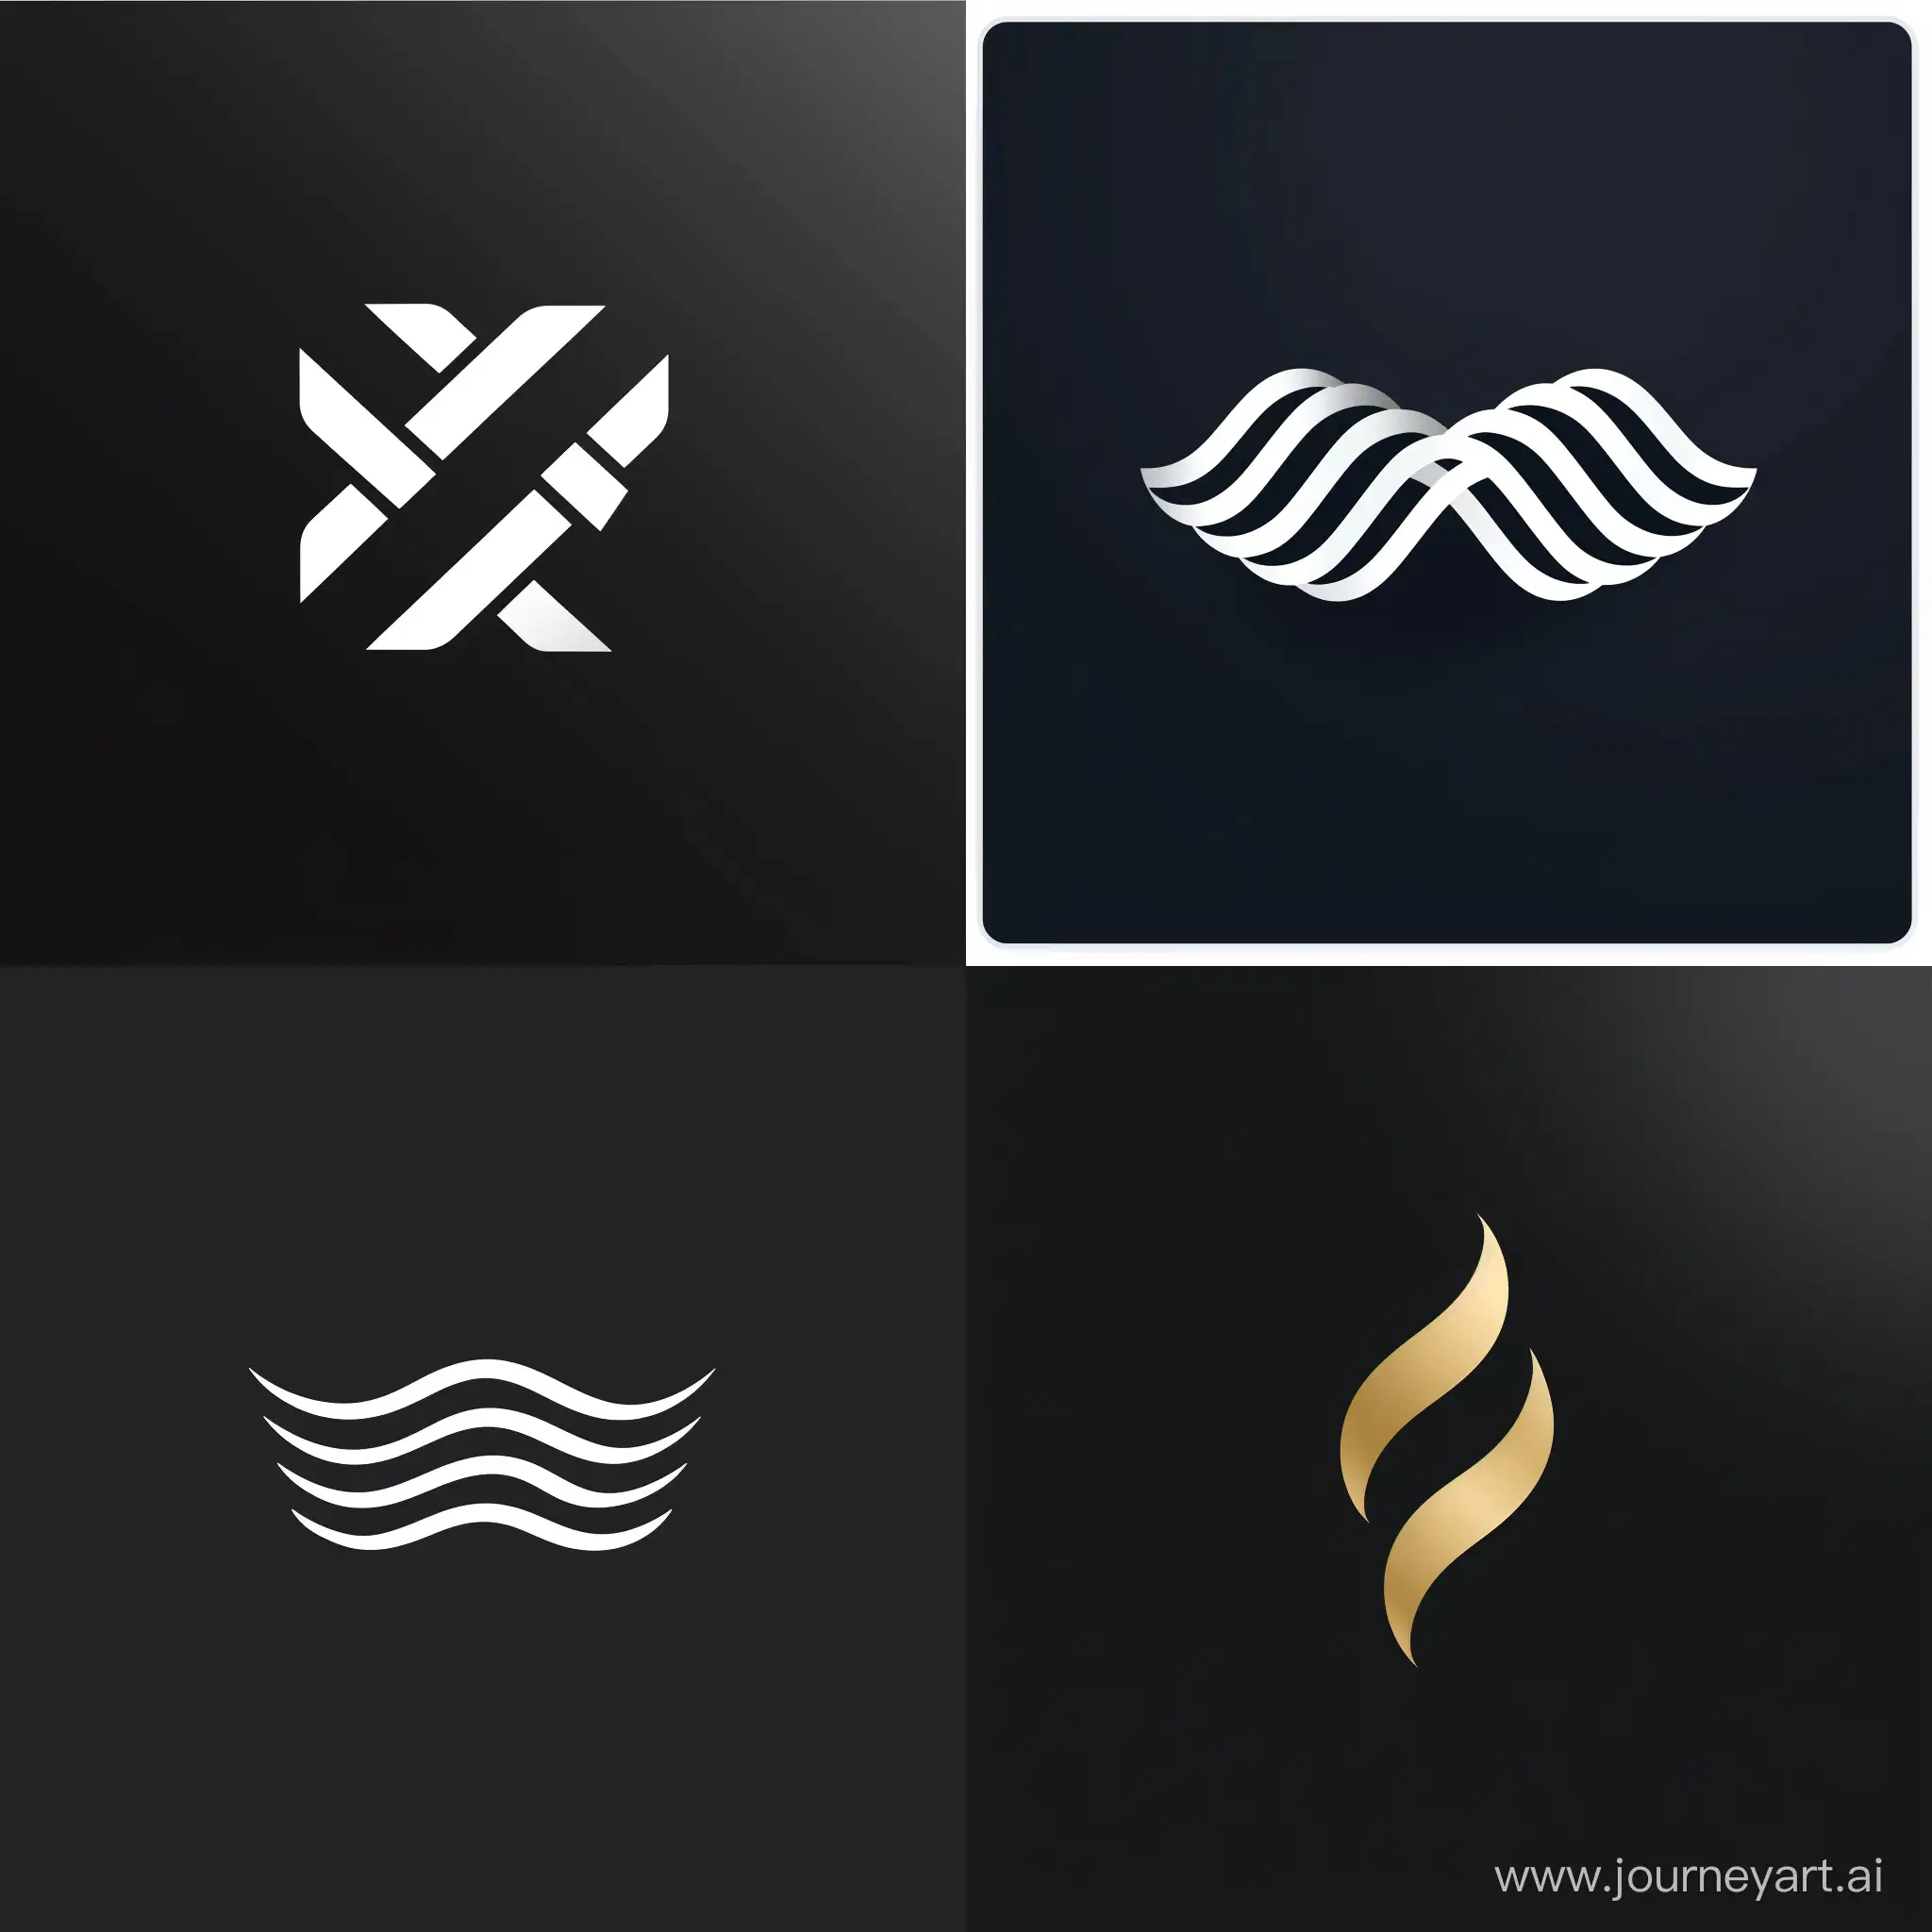 Minimalistic-Promowave-Logo-Design-with-Text-Version-6